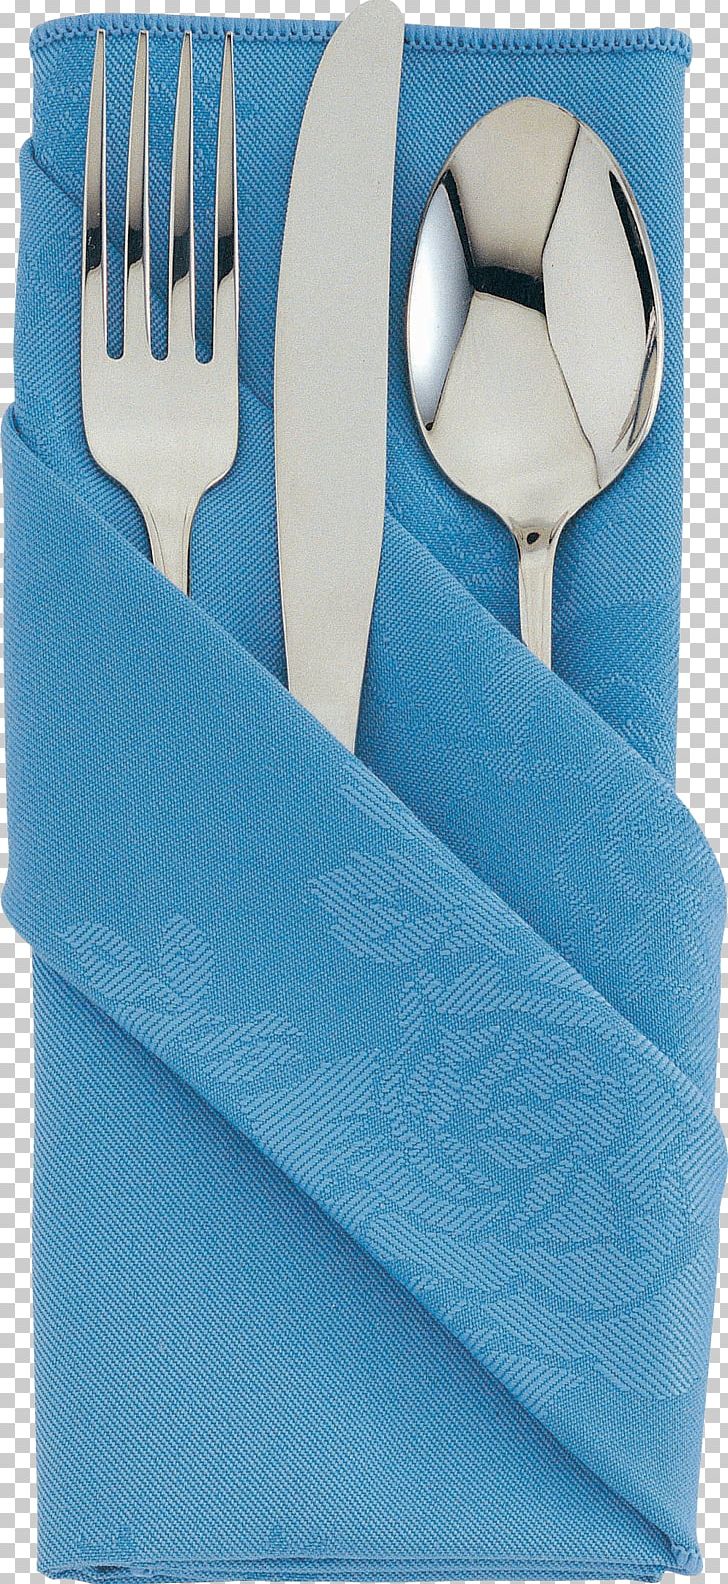 Napkin Knife Fork Spoon PNG, Clipart, Aqua, Azure, Blue, Cutlery, Electric Blue Free PNG Download